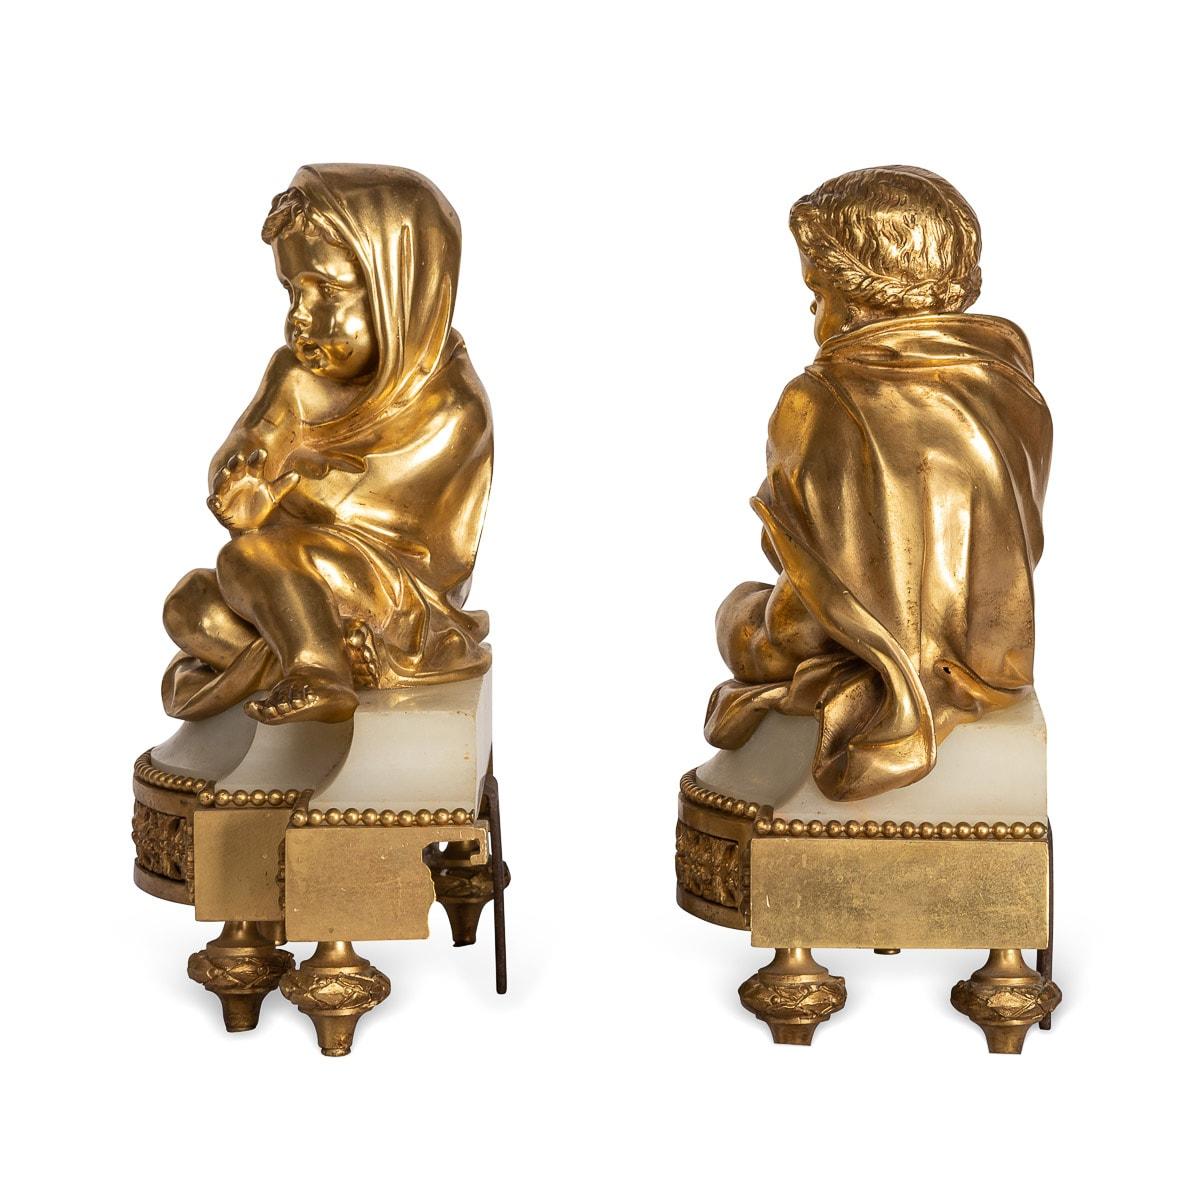 Antique mid 19th century French beautifully cast pair of gilt bronze fireplace chenets. These chenets are adorned by reclining puttis on a beautiful marble base, decorated with beautiful floral rosetts, floral bands on shaped garland